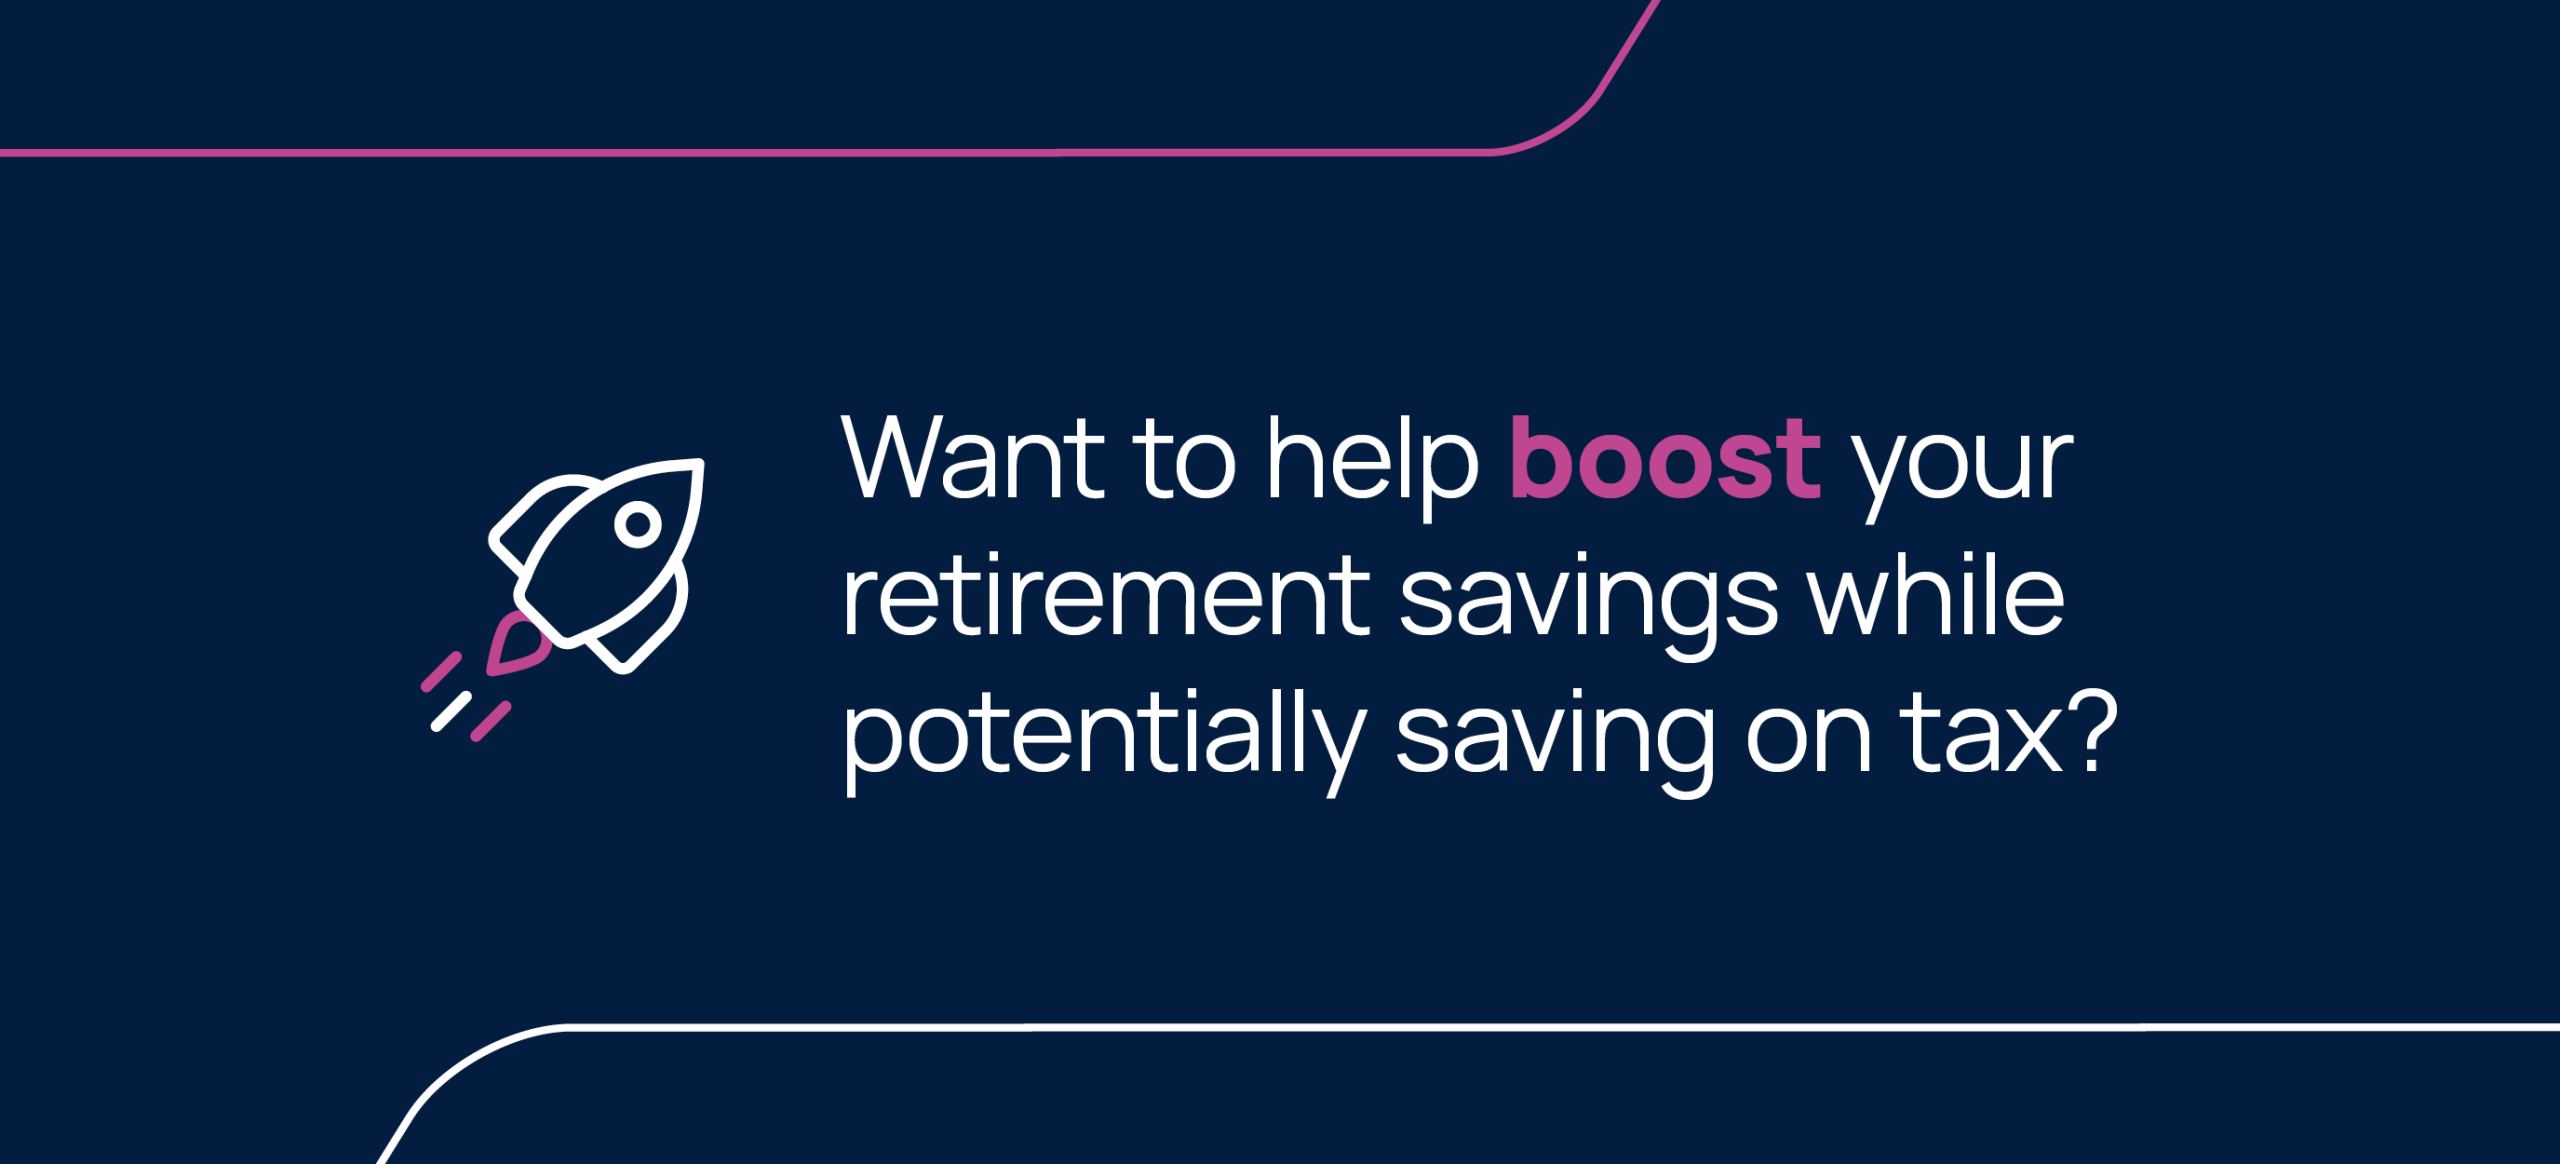 5 strategies to boost your super while potentially saving on tax.